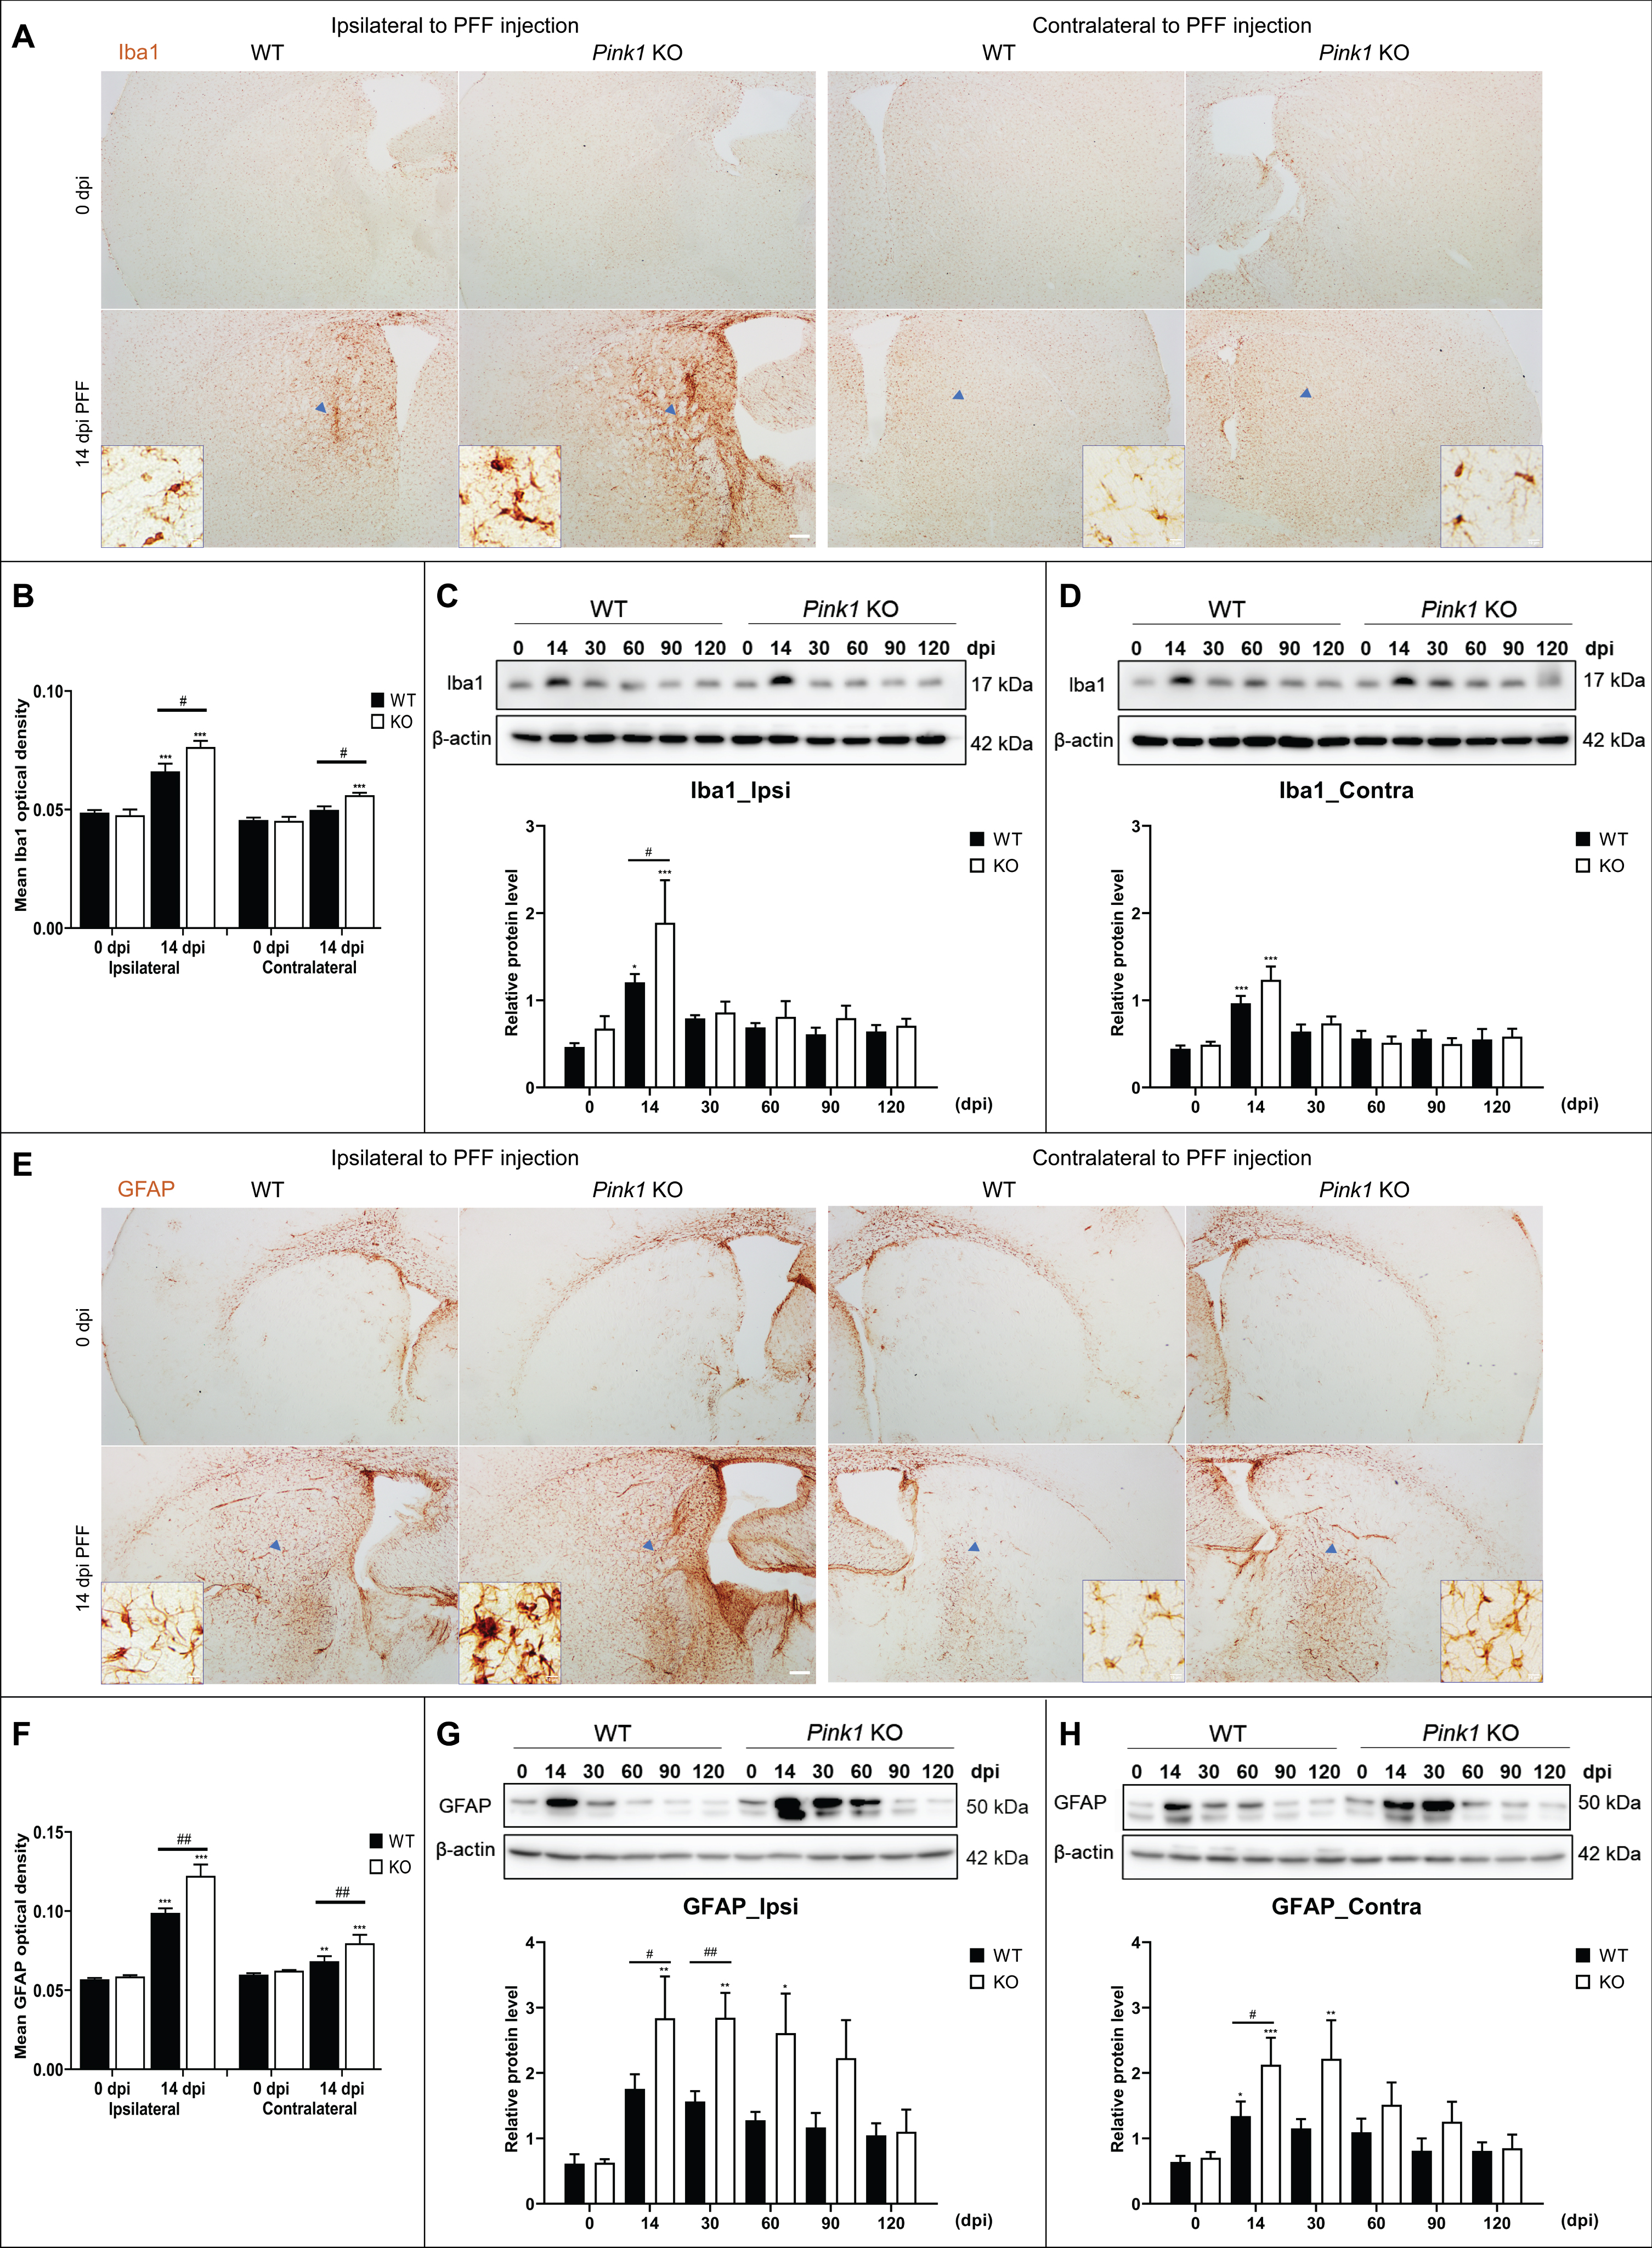 Loss of Pink1 function increased glial activation after PFF injection. Iba1-positive microglial immunoreactivity in the whole striatum at baseline and 14 days after PFF injection (A) and its quantification (B). Scale bar = 200μm. Western blot result of Iba1 expression level and its densitometry in the ipsilateral (C) and contralateral (D) brain. GFAP-positive astrocytic immunoreactivity in the striatum at baseline and 14 days after PFF injection (E) and its quantification (F). Scale bar = 200μm. The glial cell morphology revealed with higher magnification in the blue box of A and E at the site of blue arrowhead (Scale bar = 10μm). Immunoblot result for GFAP expression level and its densitometry in the ipsilateral (G) and contralateral (H) brain. β-actin was used as a loading control. Differences were determined using one-way ANOVA followed by post-hoc Sidak’s test and two-way ANOVA followed by post-hoc Turkey’s test and for multiple group comparisons. Iba1, Ionized calcium binding adaptor molecule 1; GFAP, Glial fibrillary acidic protein; otherwise are same as previous figures.